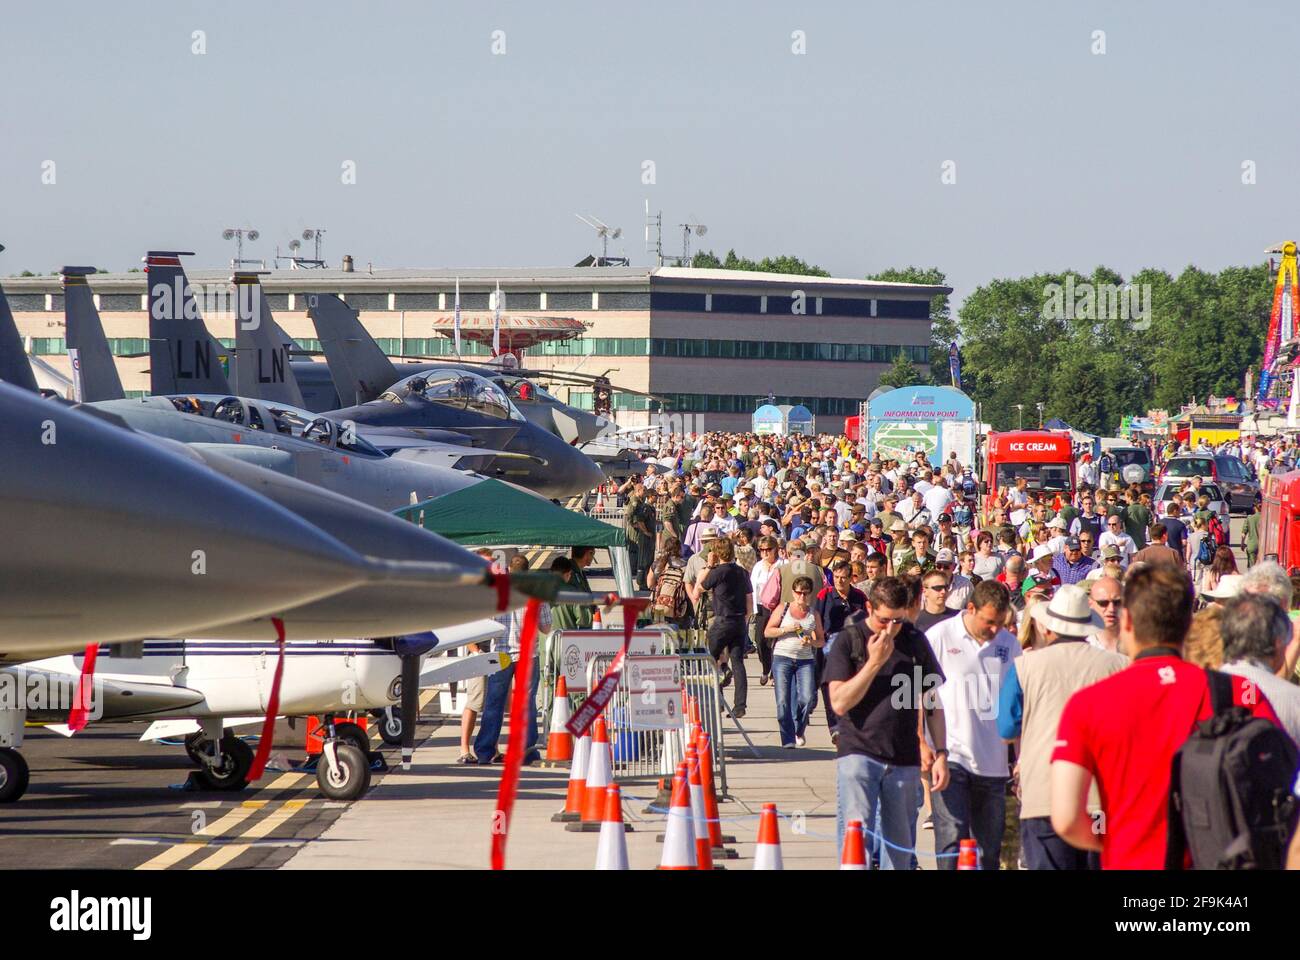 Crowds of people at the RAF Waddington Airshow 2009, with fighter jet planes on display. Packed public event. Sunny, summer event. Stock Photo